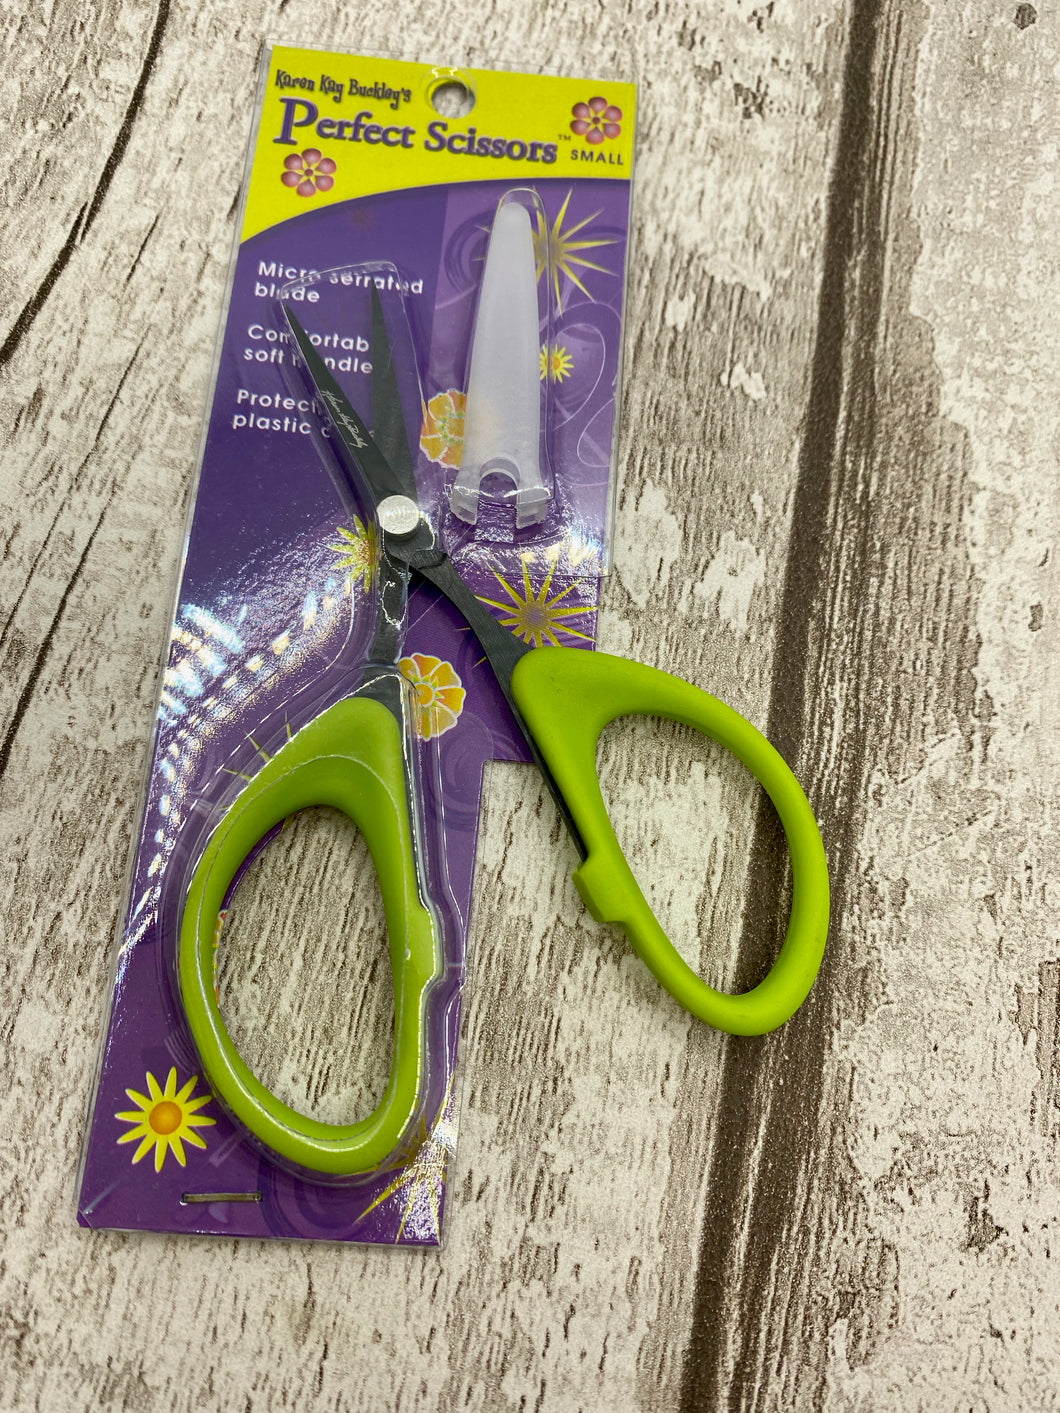 Karen Kay Buckley's Perfect Scissors - Small with micro serrated blade